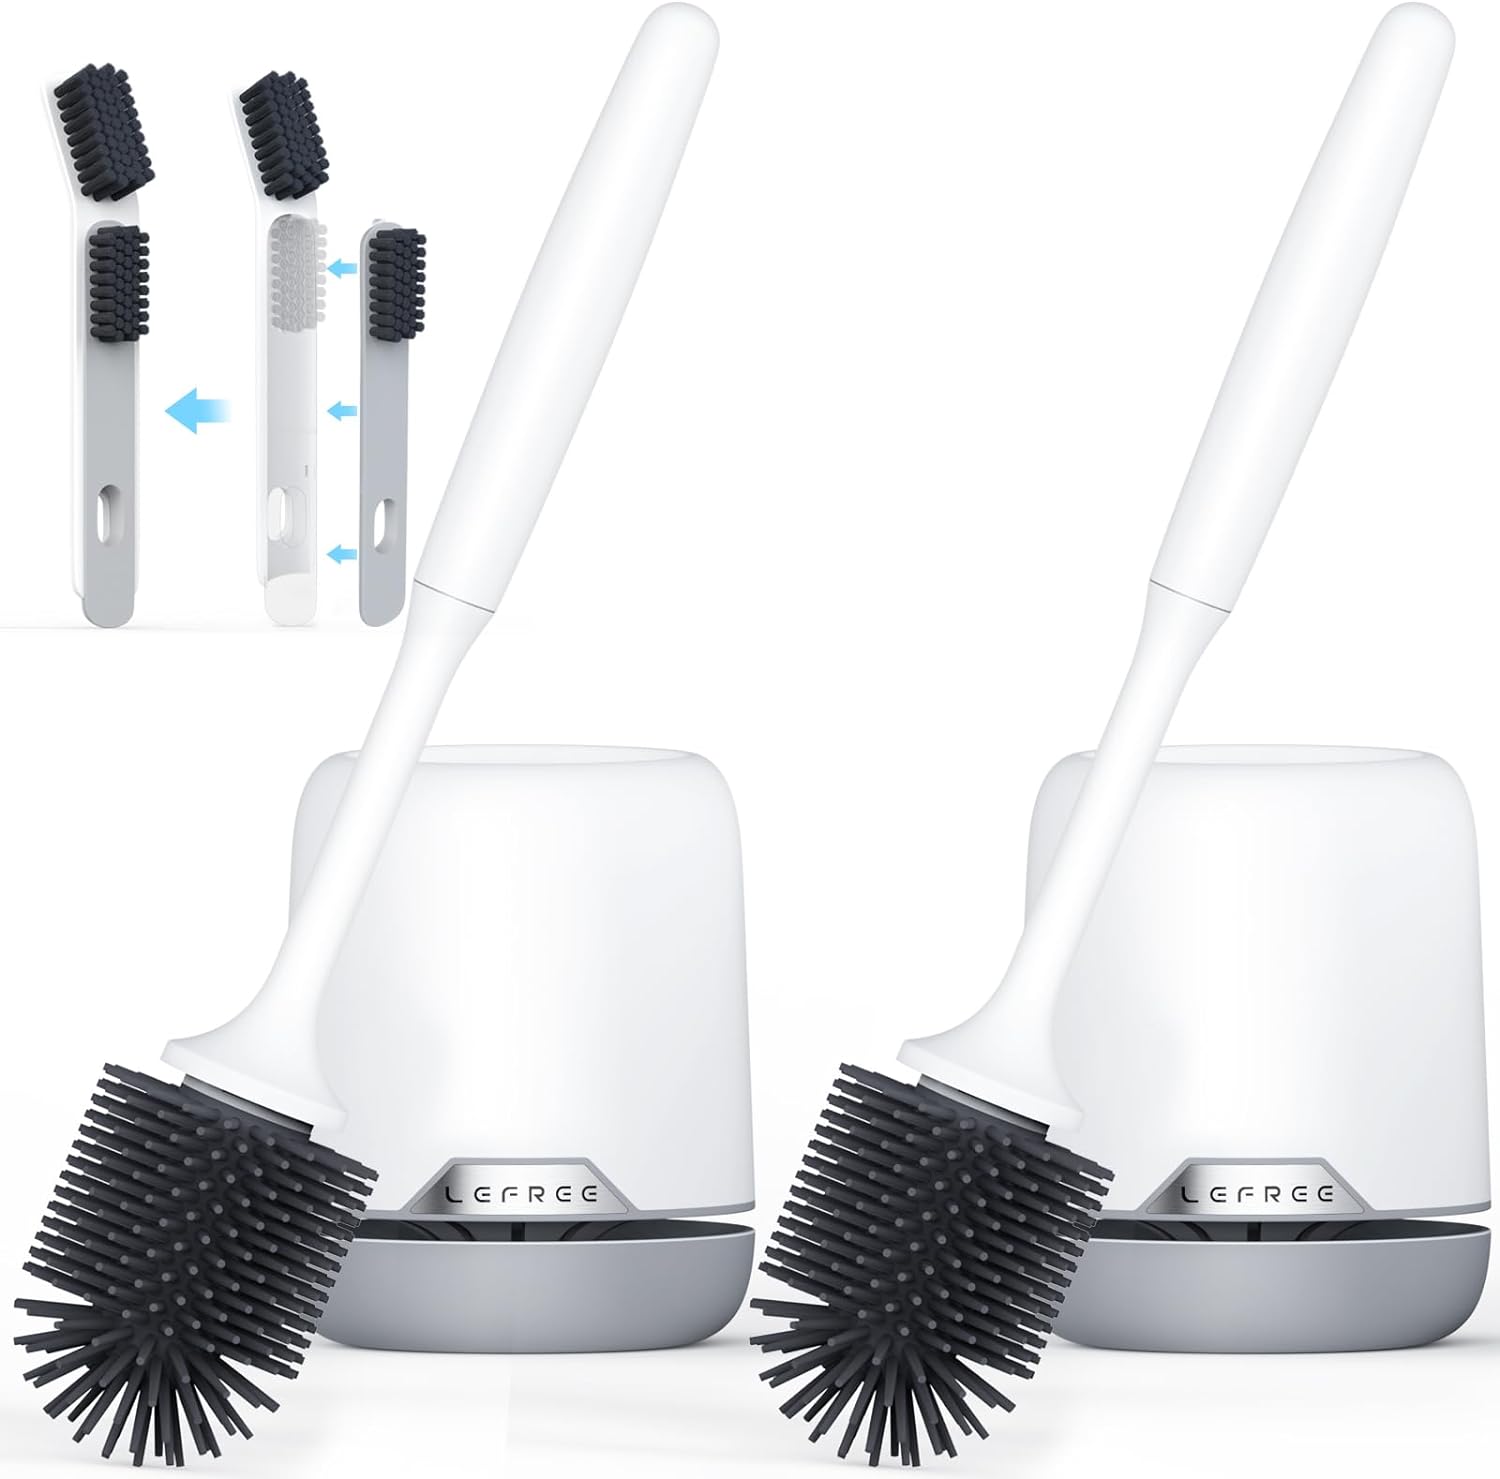 Lefree 2 Pack Silicone Toilet Brush,Homemod Toilet Bowl Brush and Holder Set with Ventilated Holder, Toilet Cleaner Brush for Bathroom,Floor Standing & Wall Mounted Toilet Scrubber Without Drilling